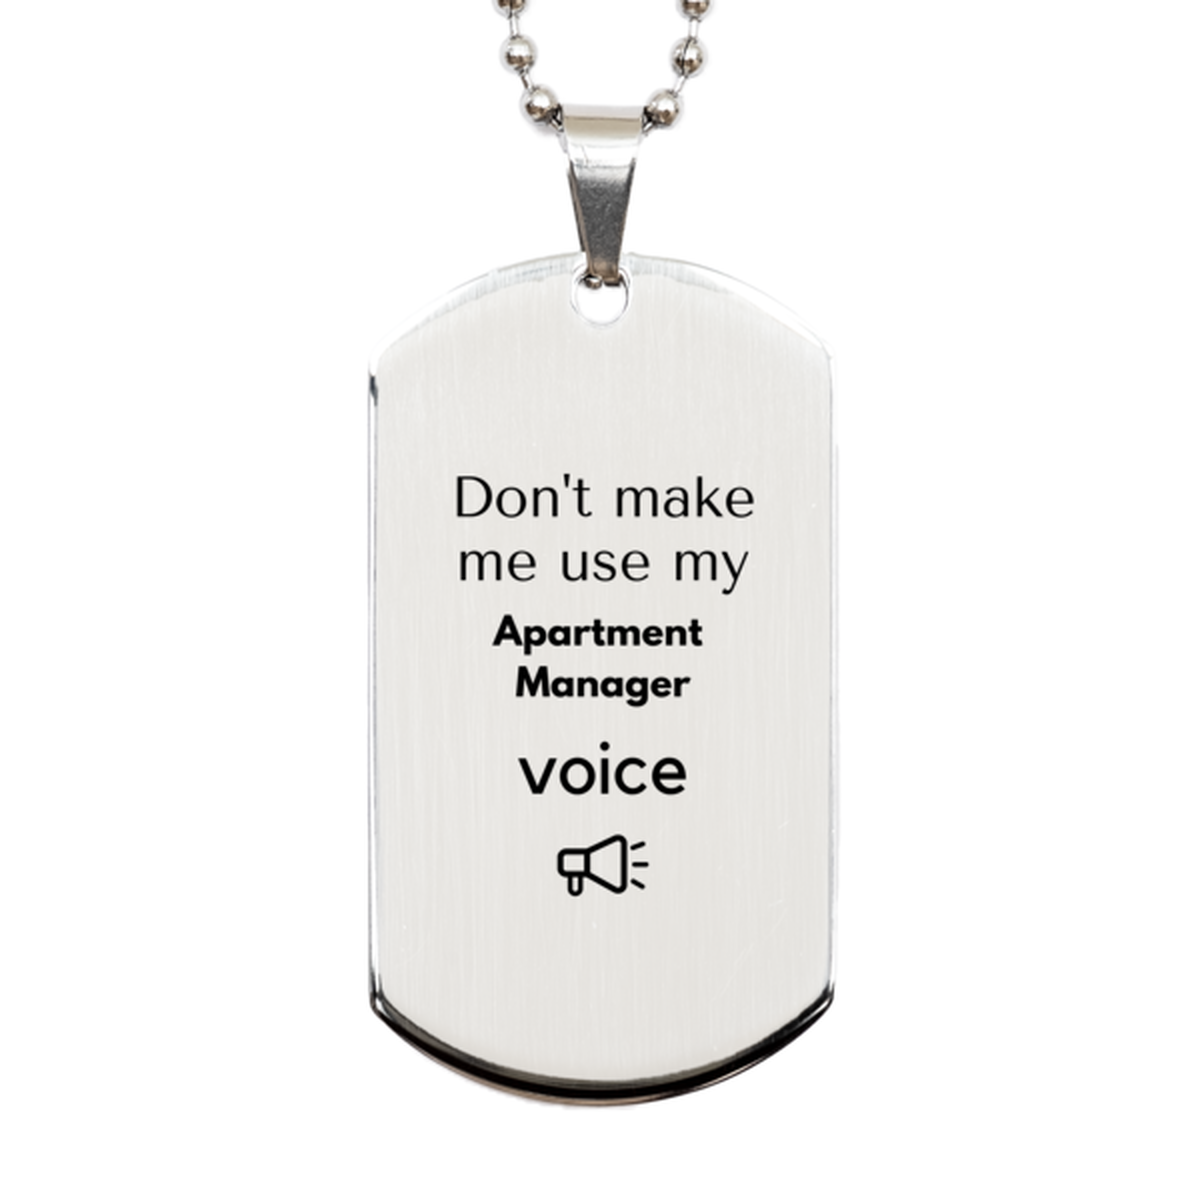 Don't make me use my Apartment Manager voice, Sarcasm Apartment Manager Gifts, Christmas Apartment Manager Silver Dog Tag Birthday Unique Gifts For Apartment Manager Coworkers, Men, Women, Colleague, Friends